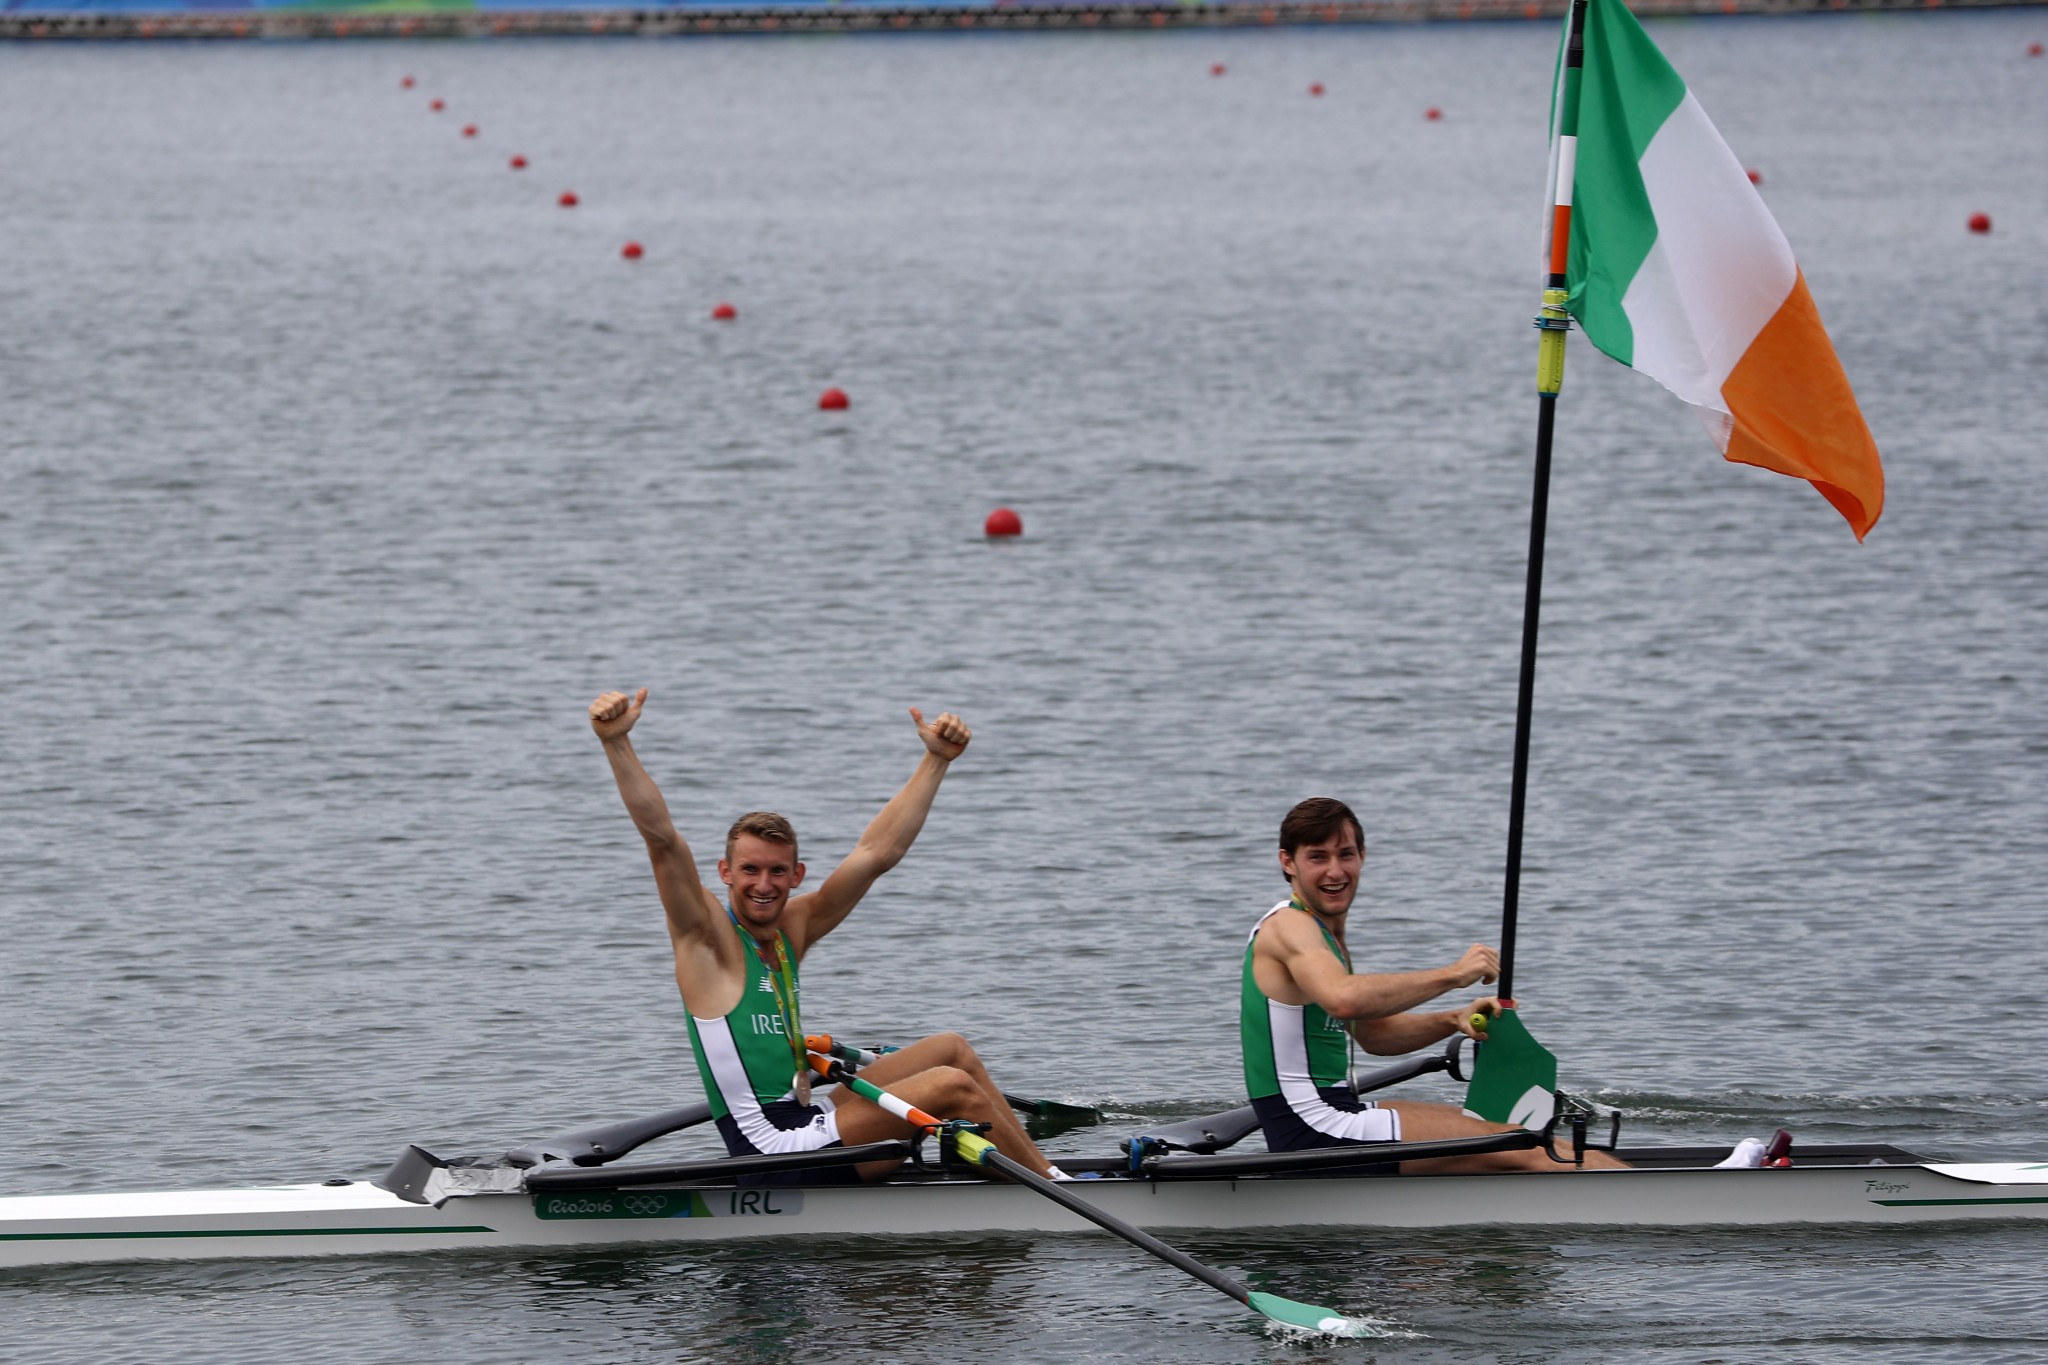 The O'Donovan brothers brought Ireland its Olympic first rowing medals ©Getty Images